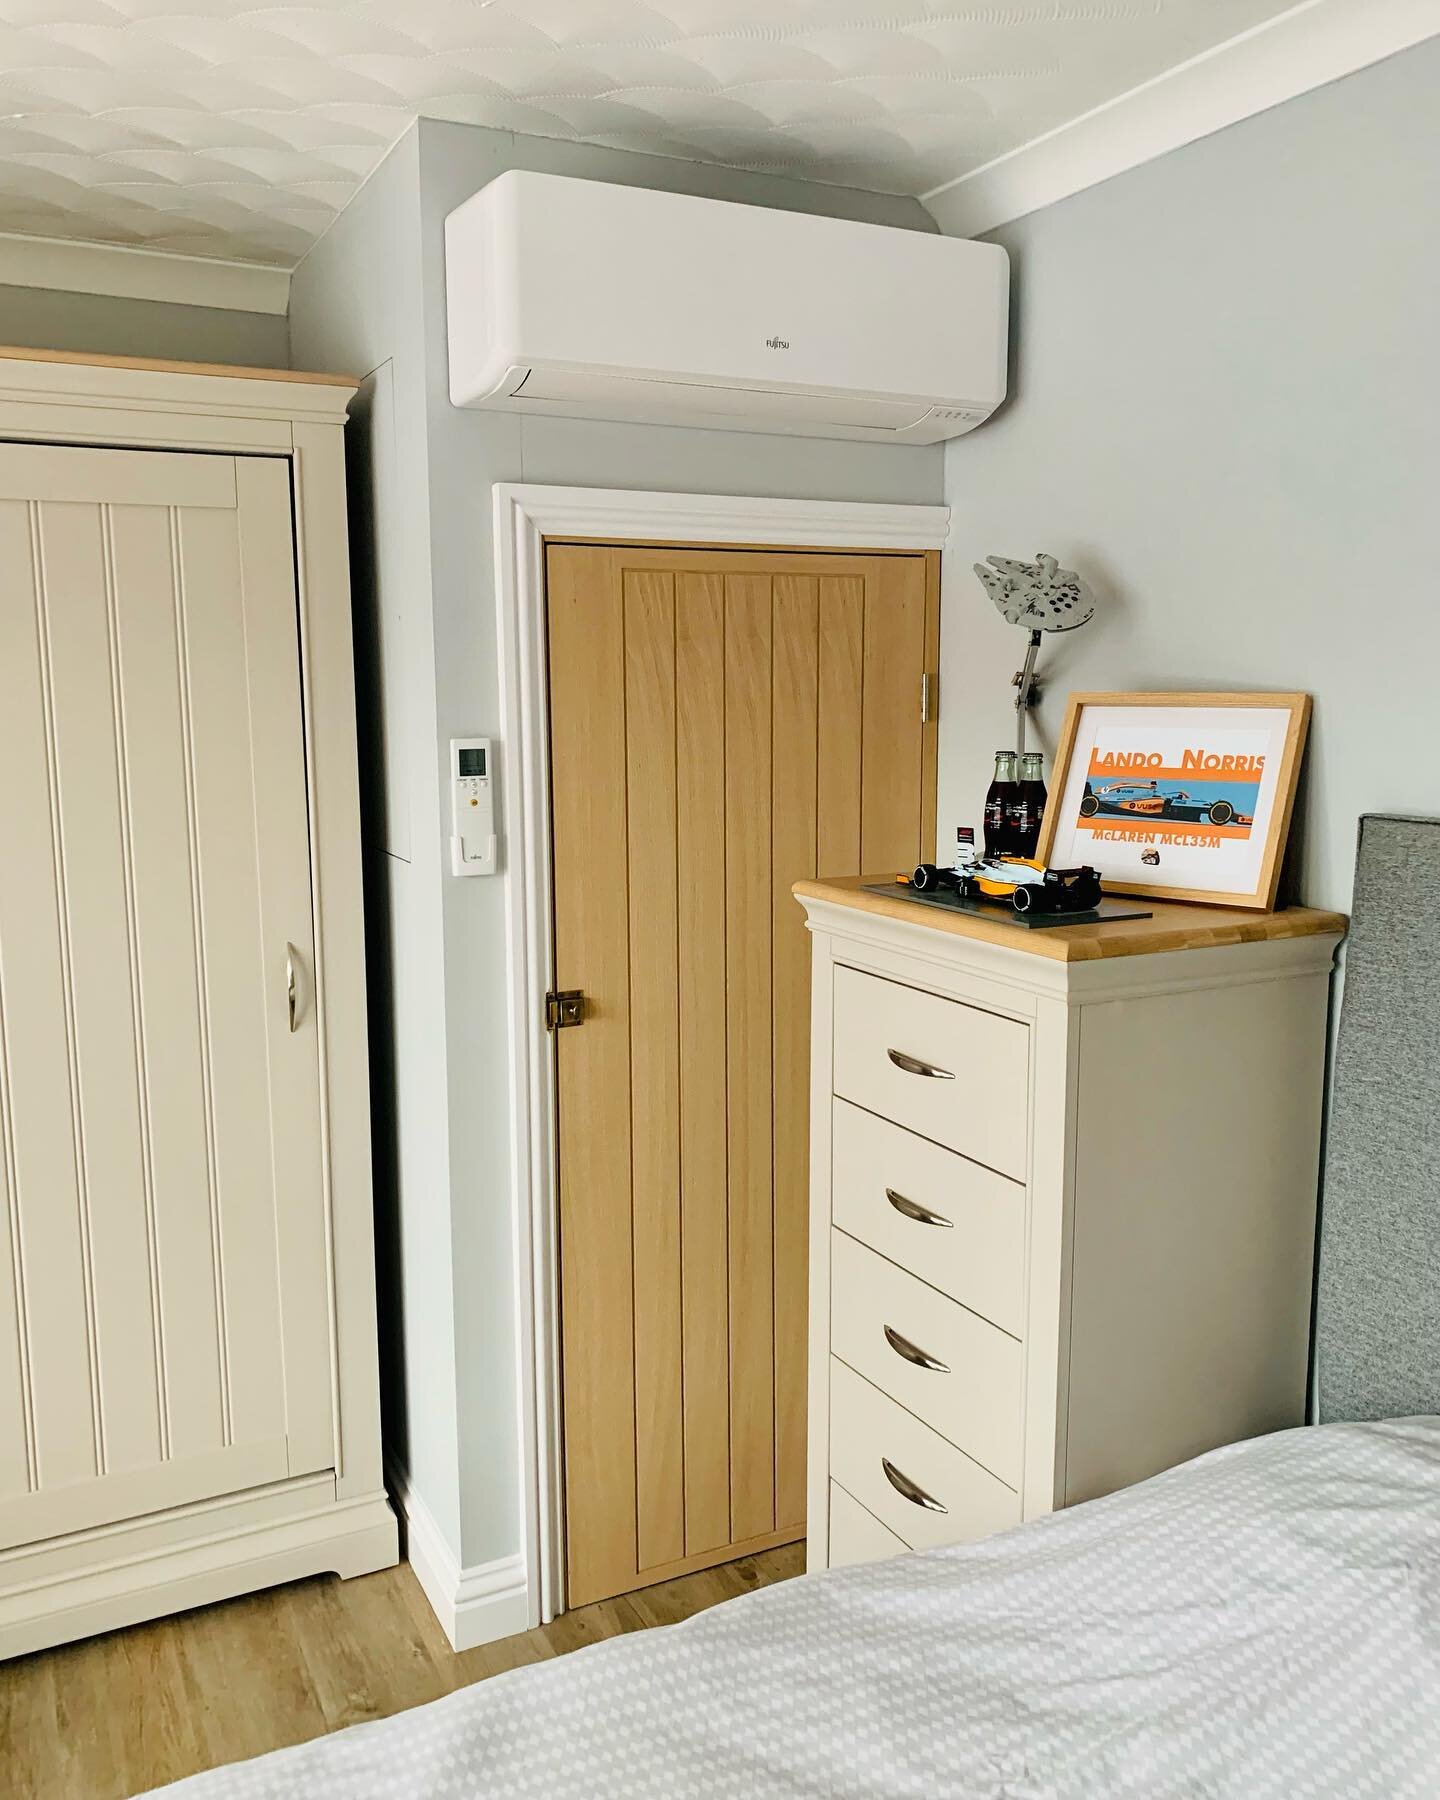 An example of a recent Air Conditioning Installation. The customer struggled to keep cool using fans last summer so is looking forward to a more comfortable sleep this year! Look out for an exciting offer on new Air Conditioning Installations coming 